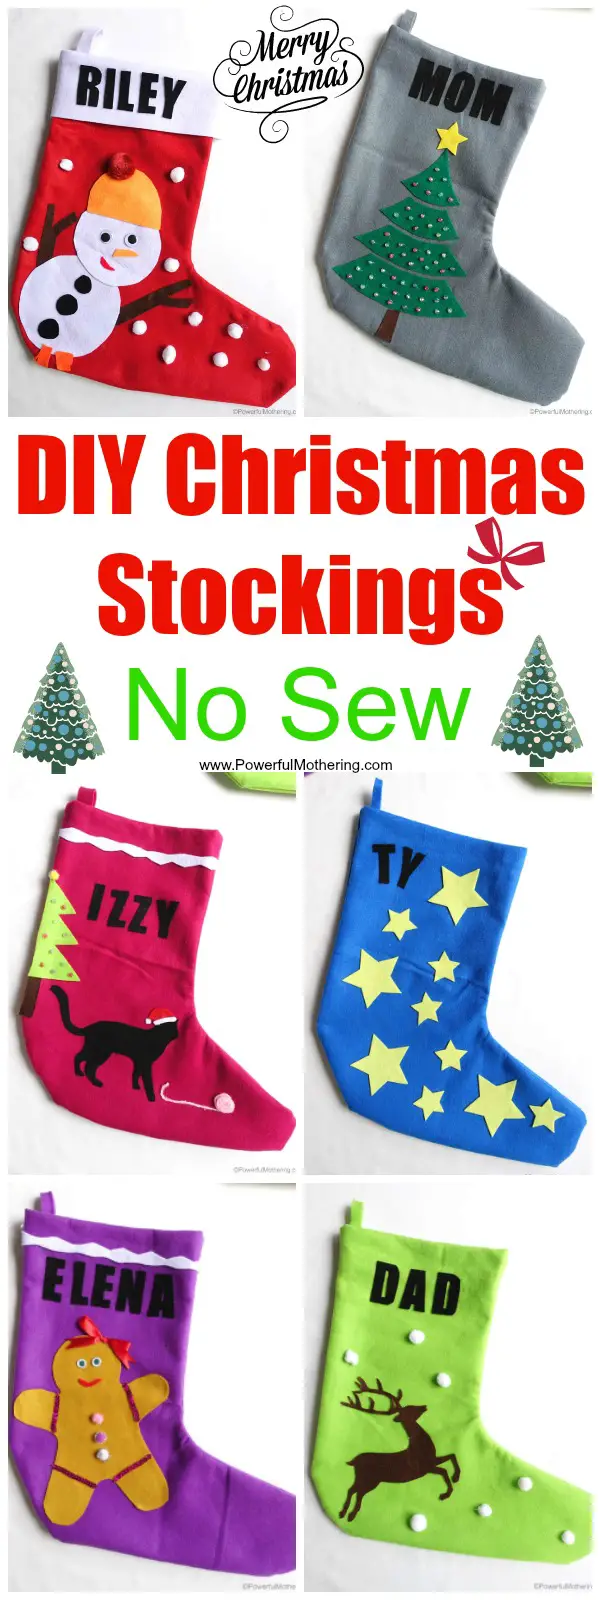 DIY Christmas Stockings No Sew great for personalization!